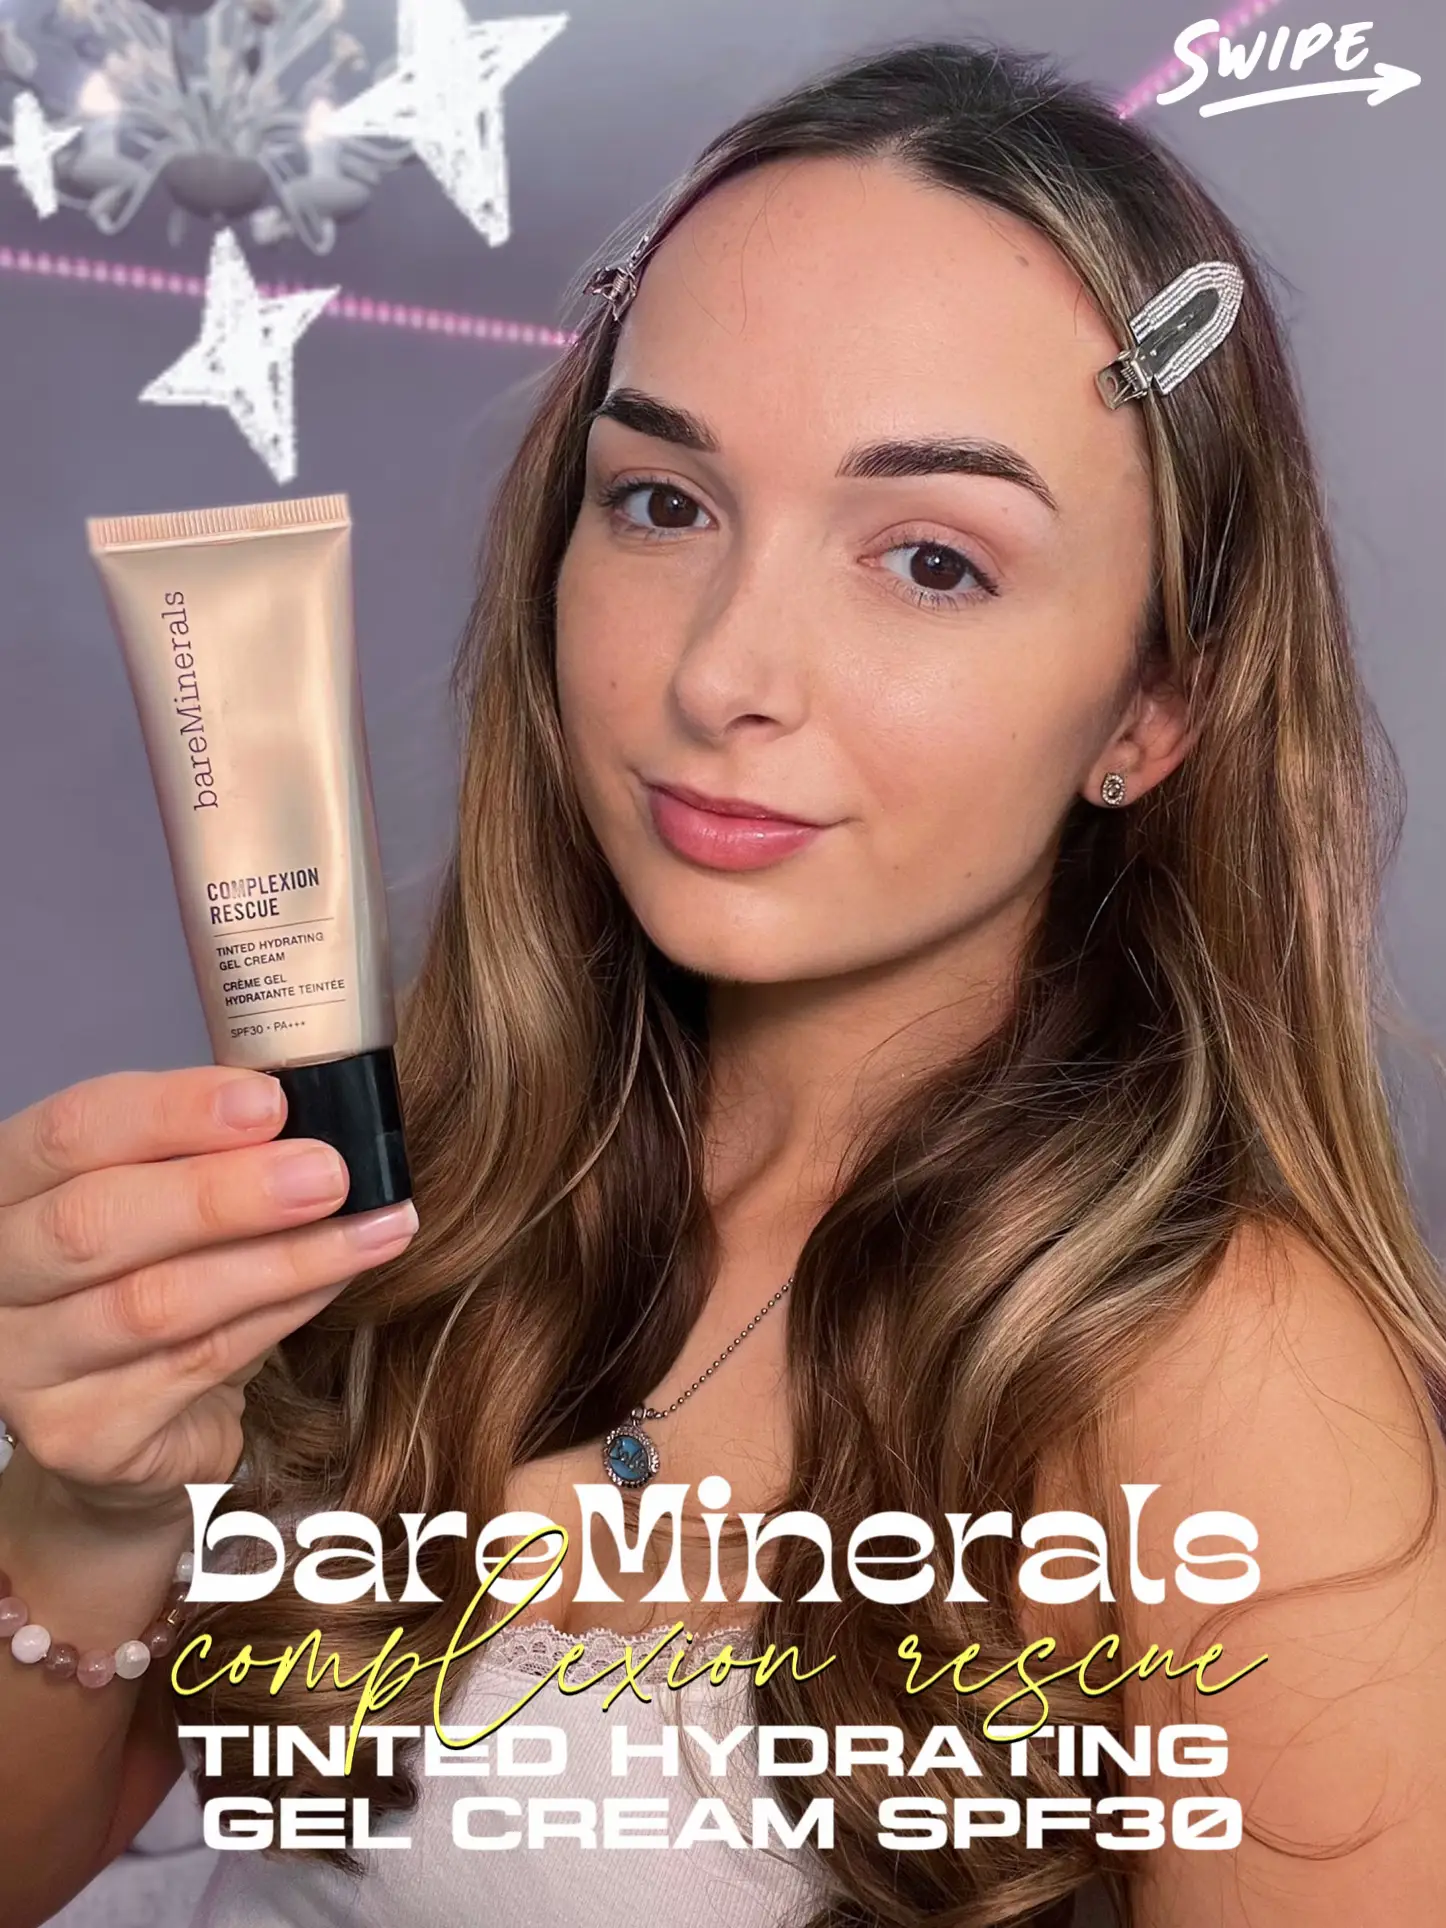 REVIEW 🌞 bareMinerals Complexion Rescue SPF30, Gallery posted by siani💫